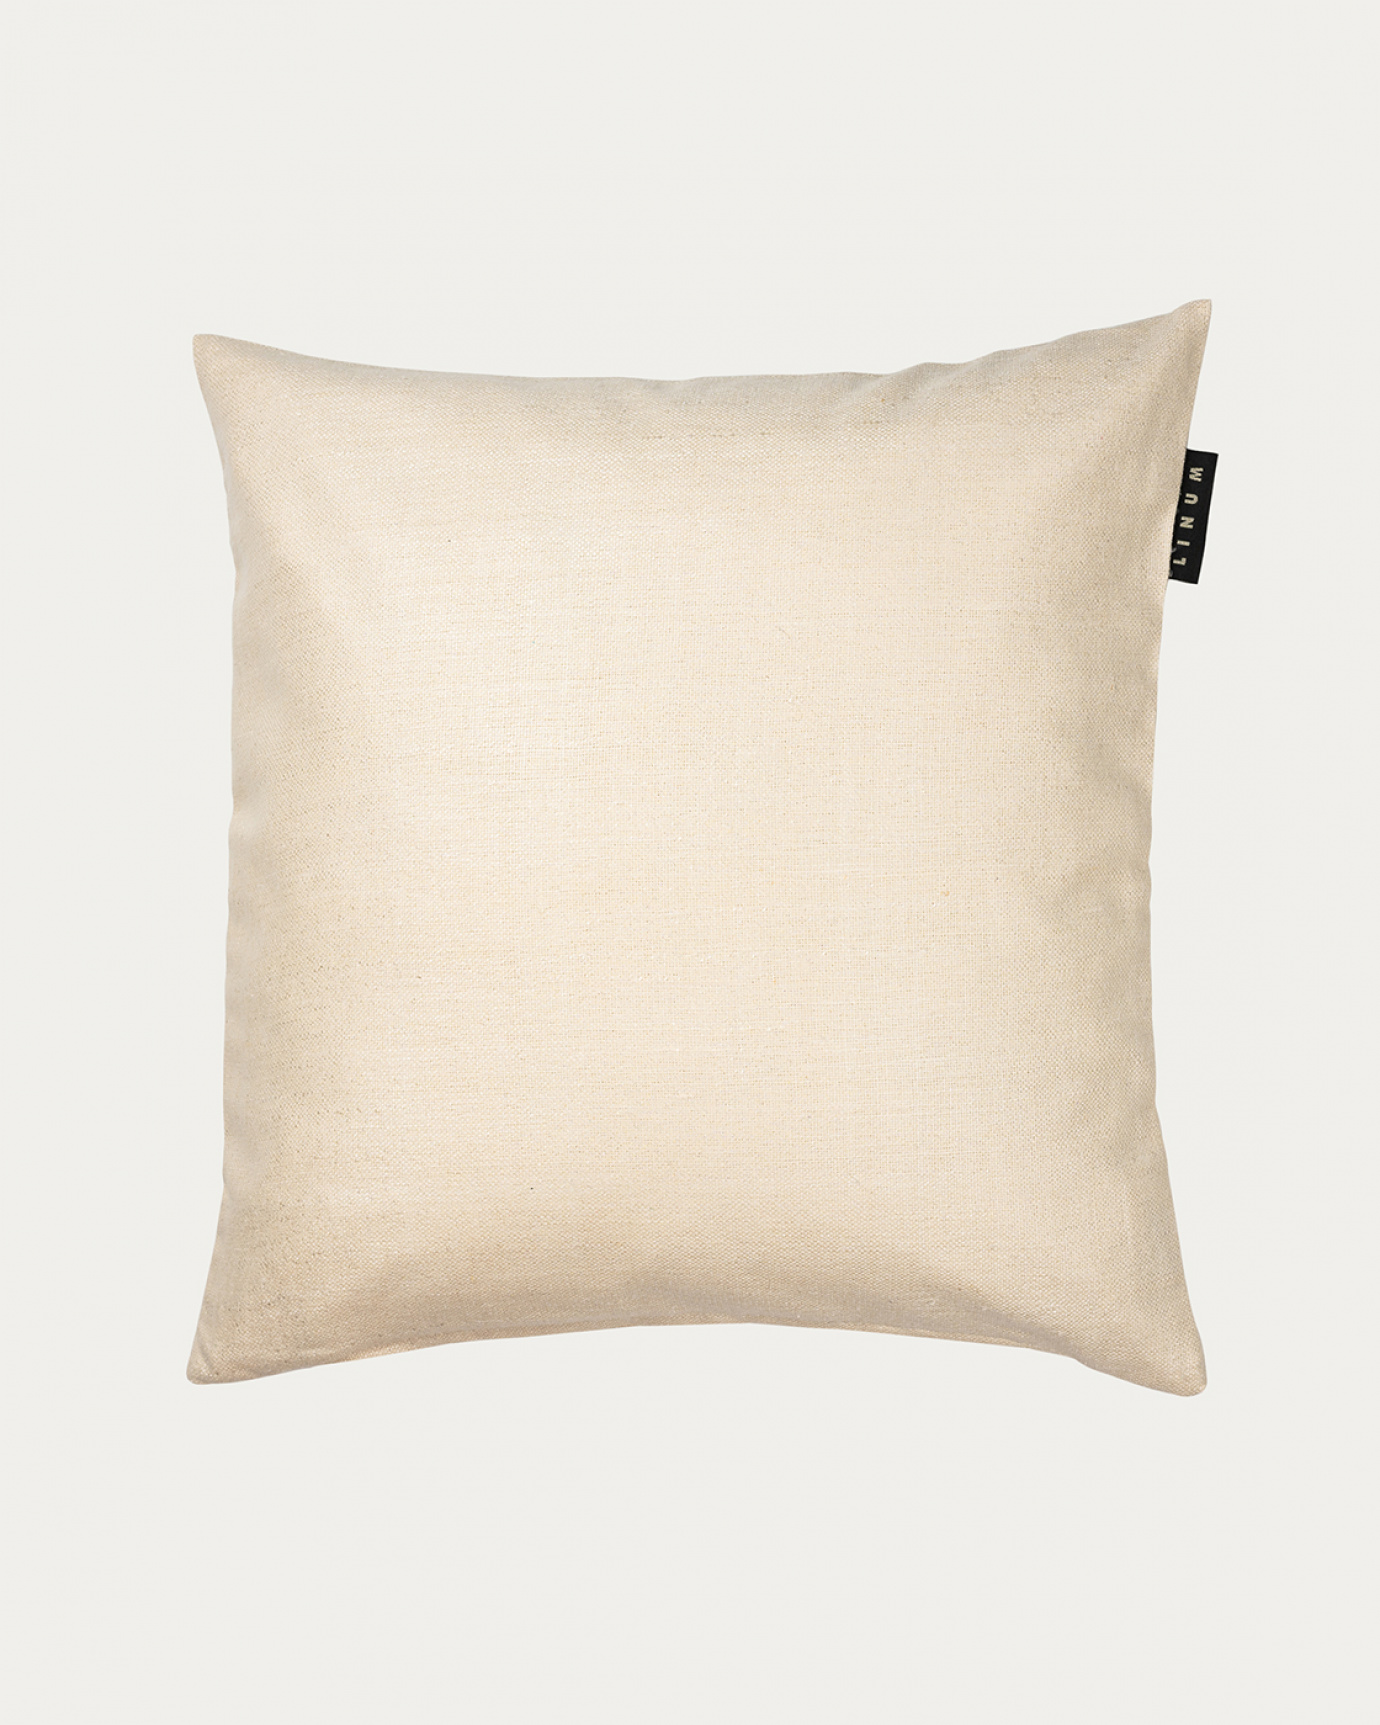 Product image light beige SETA cushion cover made of 100% raw silk that gives a nice lustre from LINUM DESIGN. Size 50x50 cm.